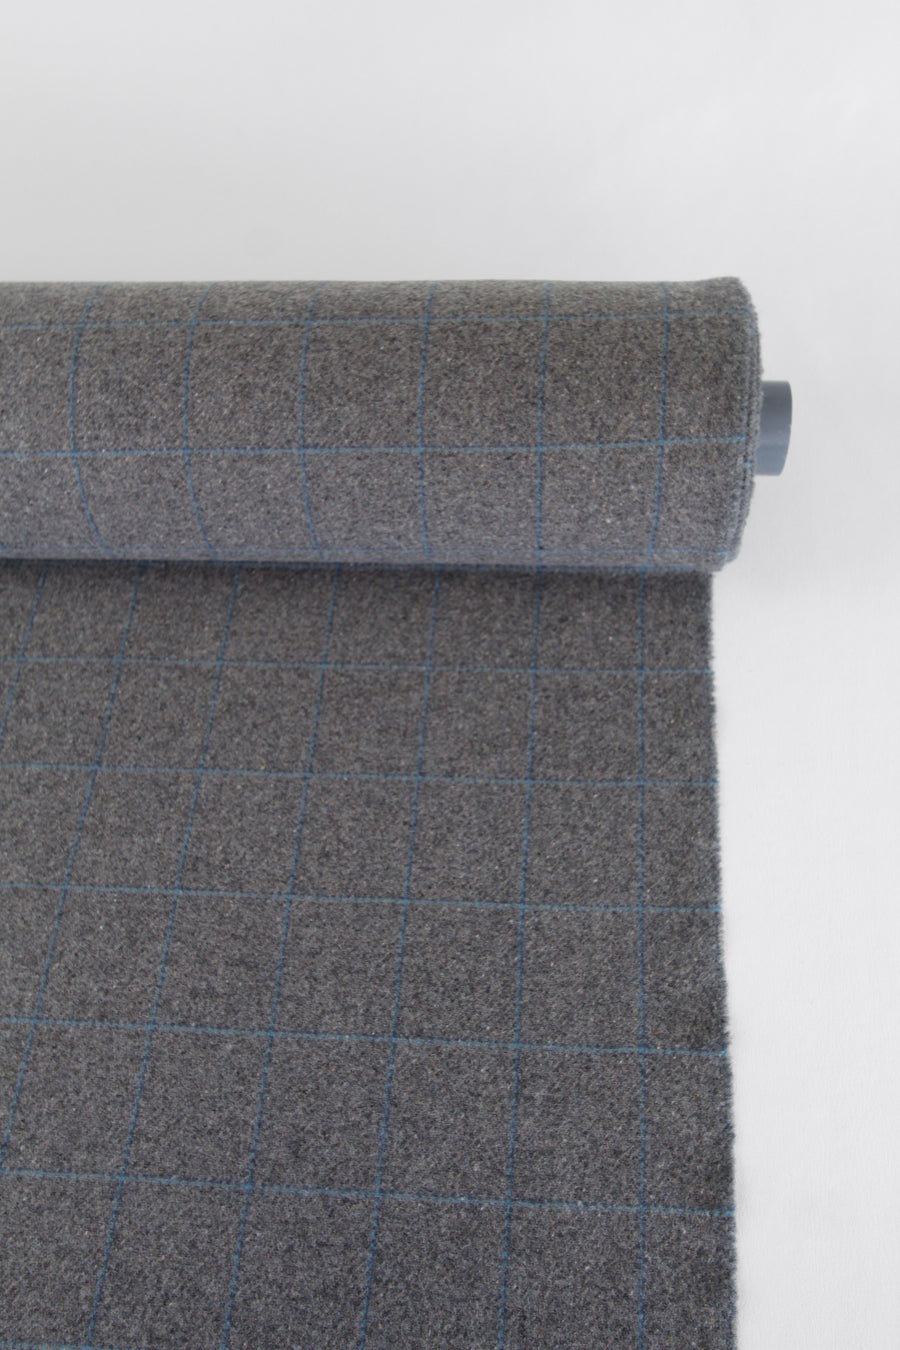 Duncan - Pure Wool Coating | Pewter